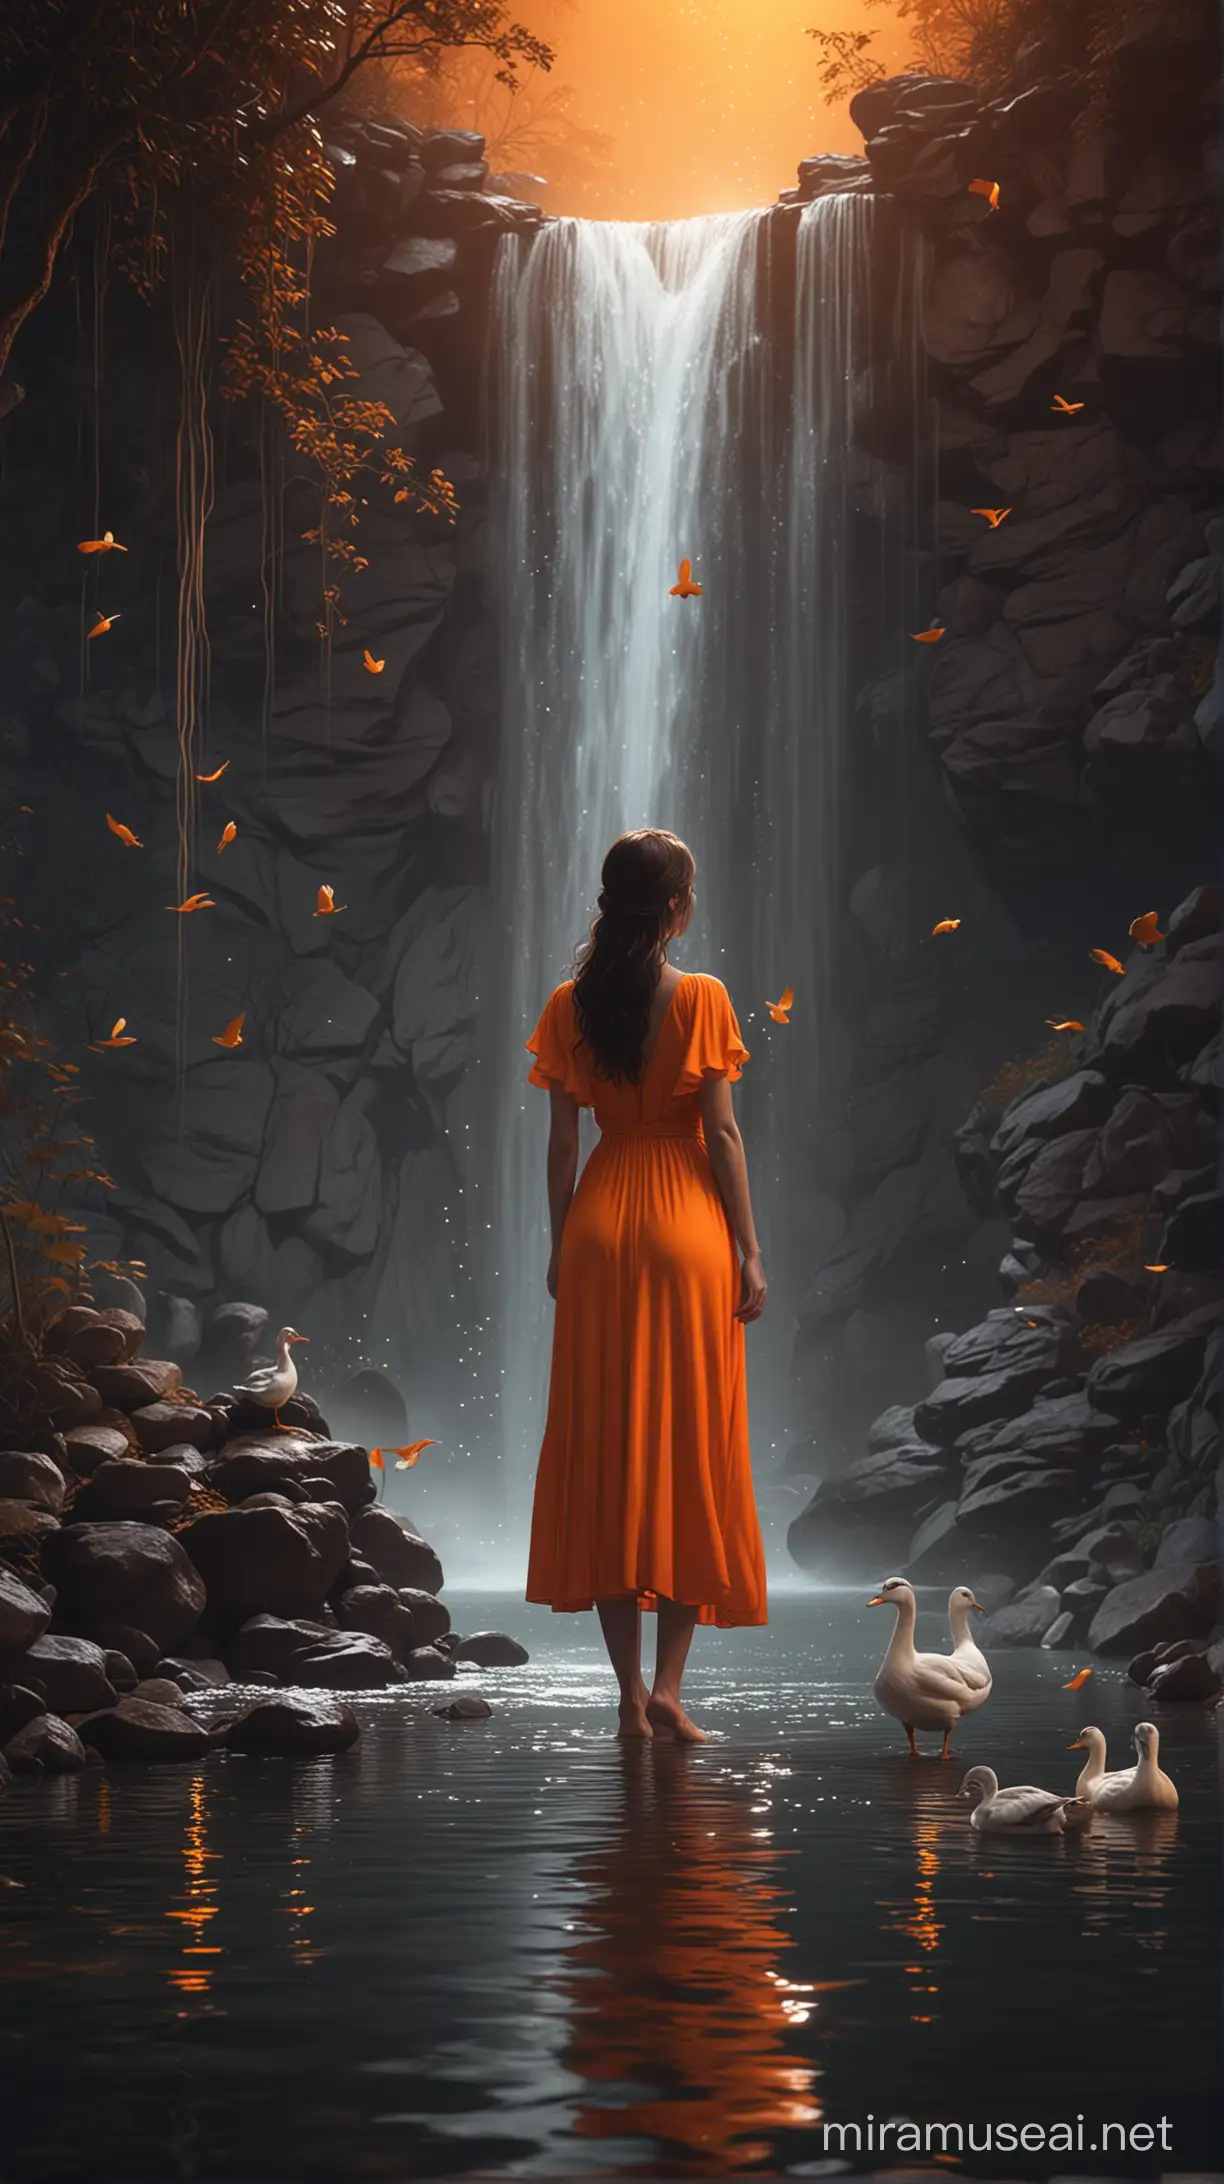 3D 8k mininal realistic illustrator mininal woman beside the water fall with ducks shinning and glittering at the midnight with her orange light dress